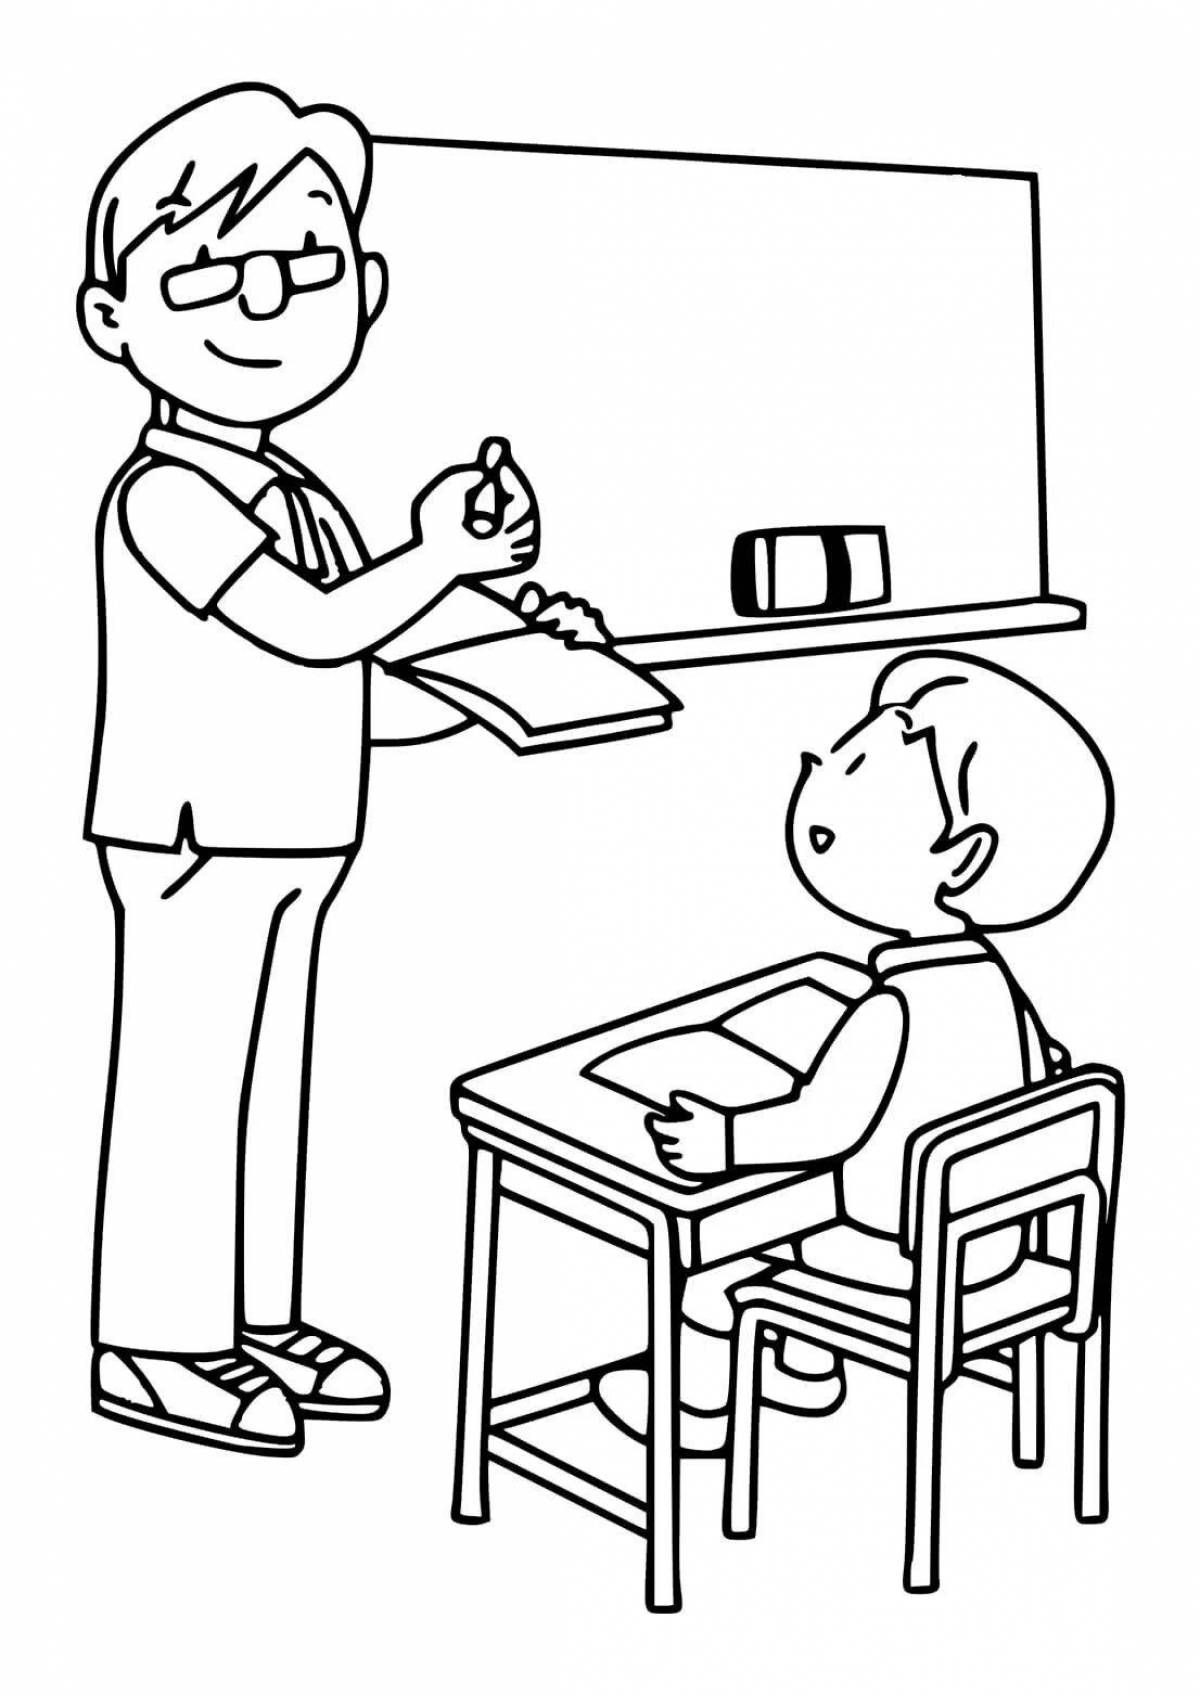 Colorful coloring page insight when learning is fun